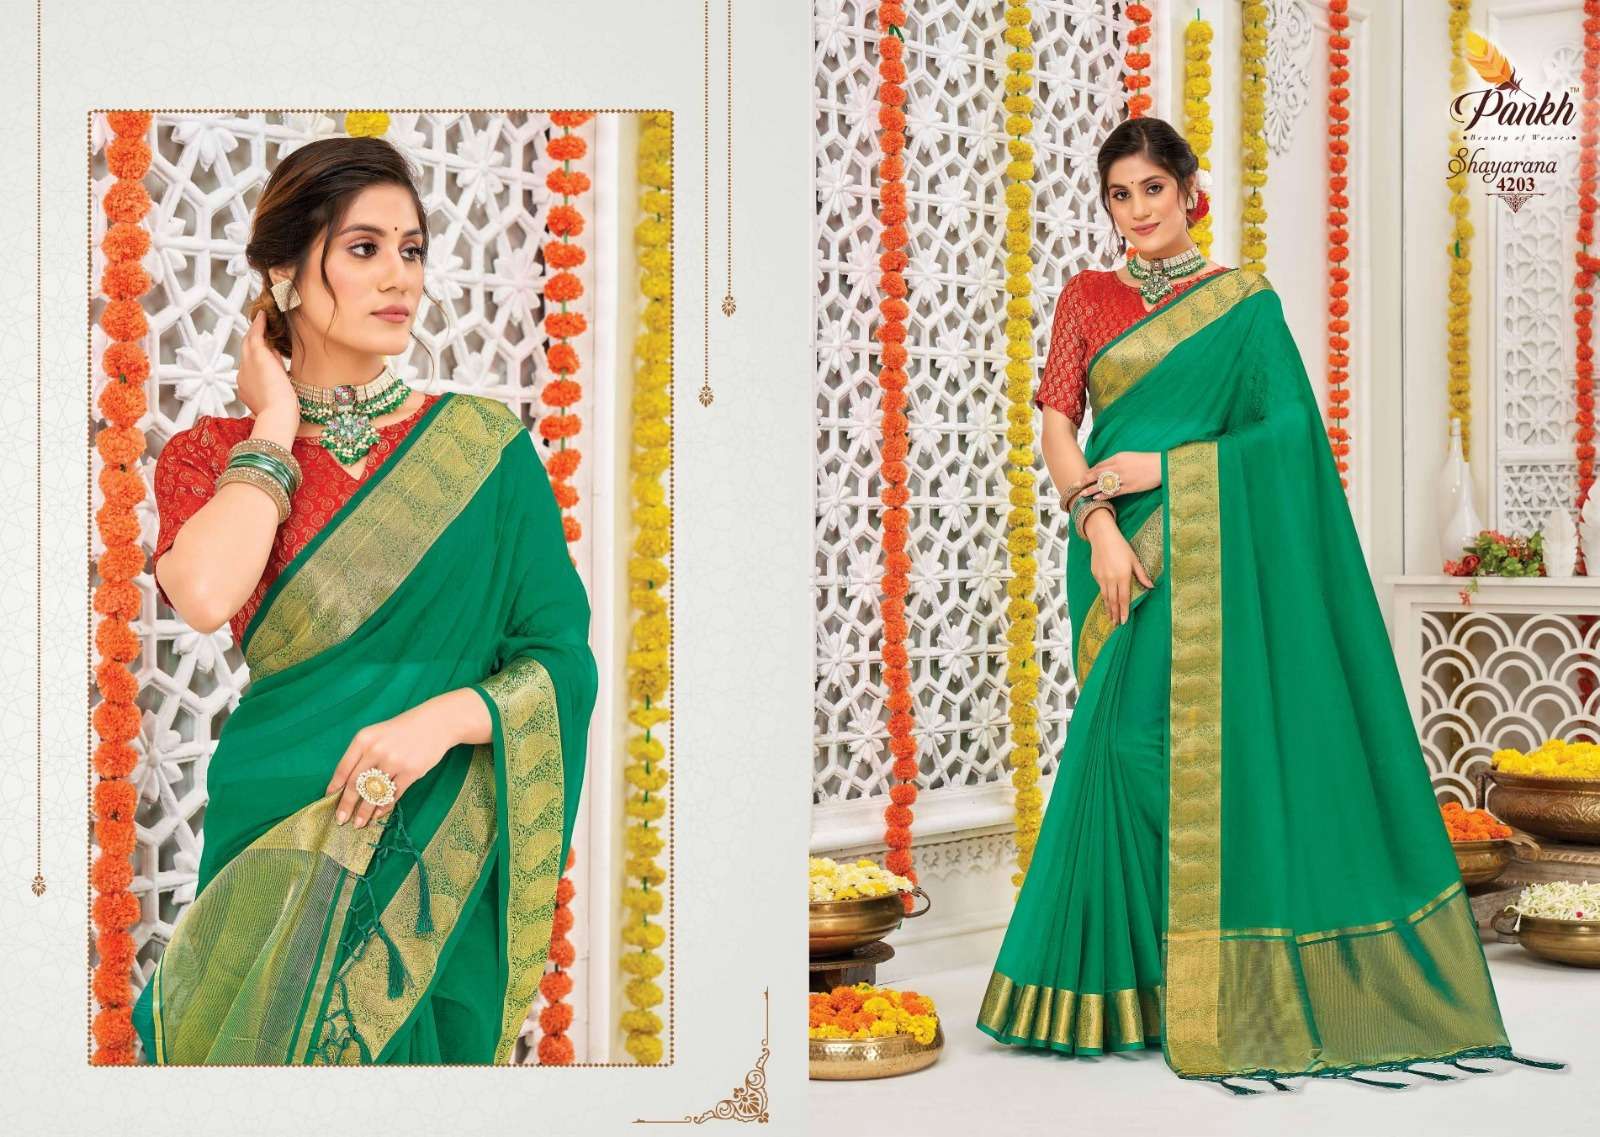 Shayarana Vol-1 By Pankh Creation 4201 To 4210 Indian Traditional Wear Collection Beautiful Stylish Fancy Colorful Party Wear & Occasional Wear Organza Silk Sarees At Wholesale Price